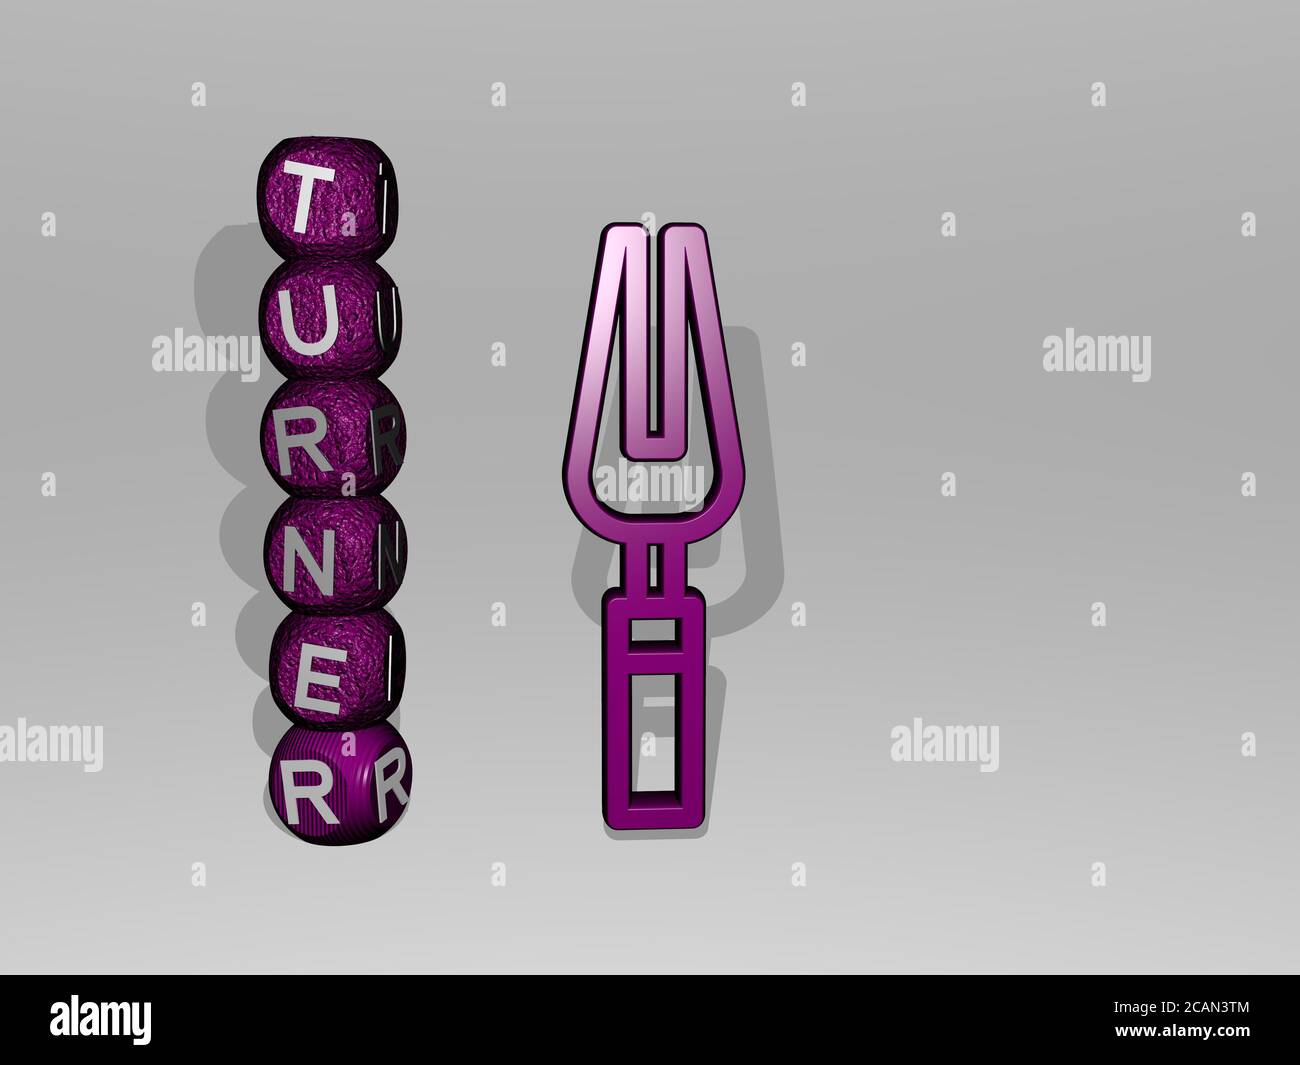 turner 3D icon and dice letter text. 3D illustration Stock Photo